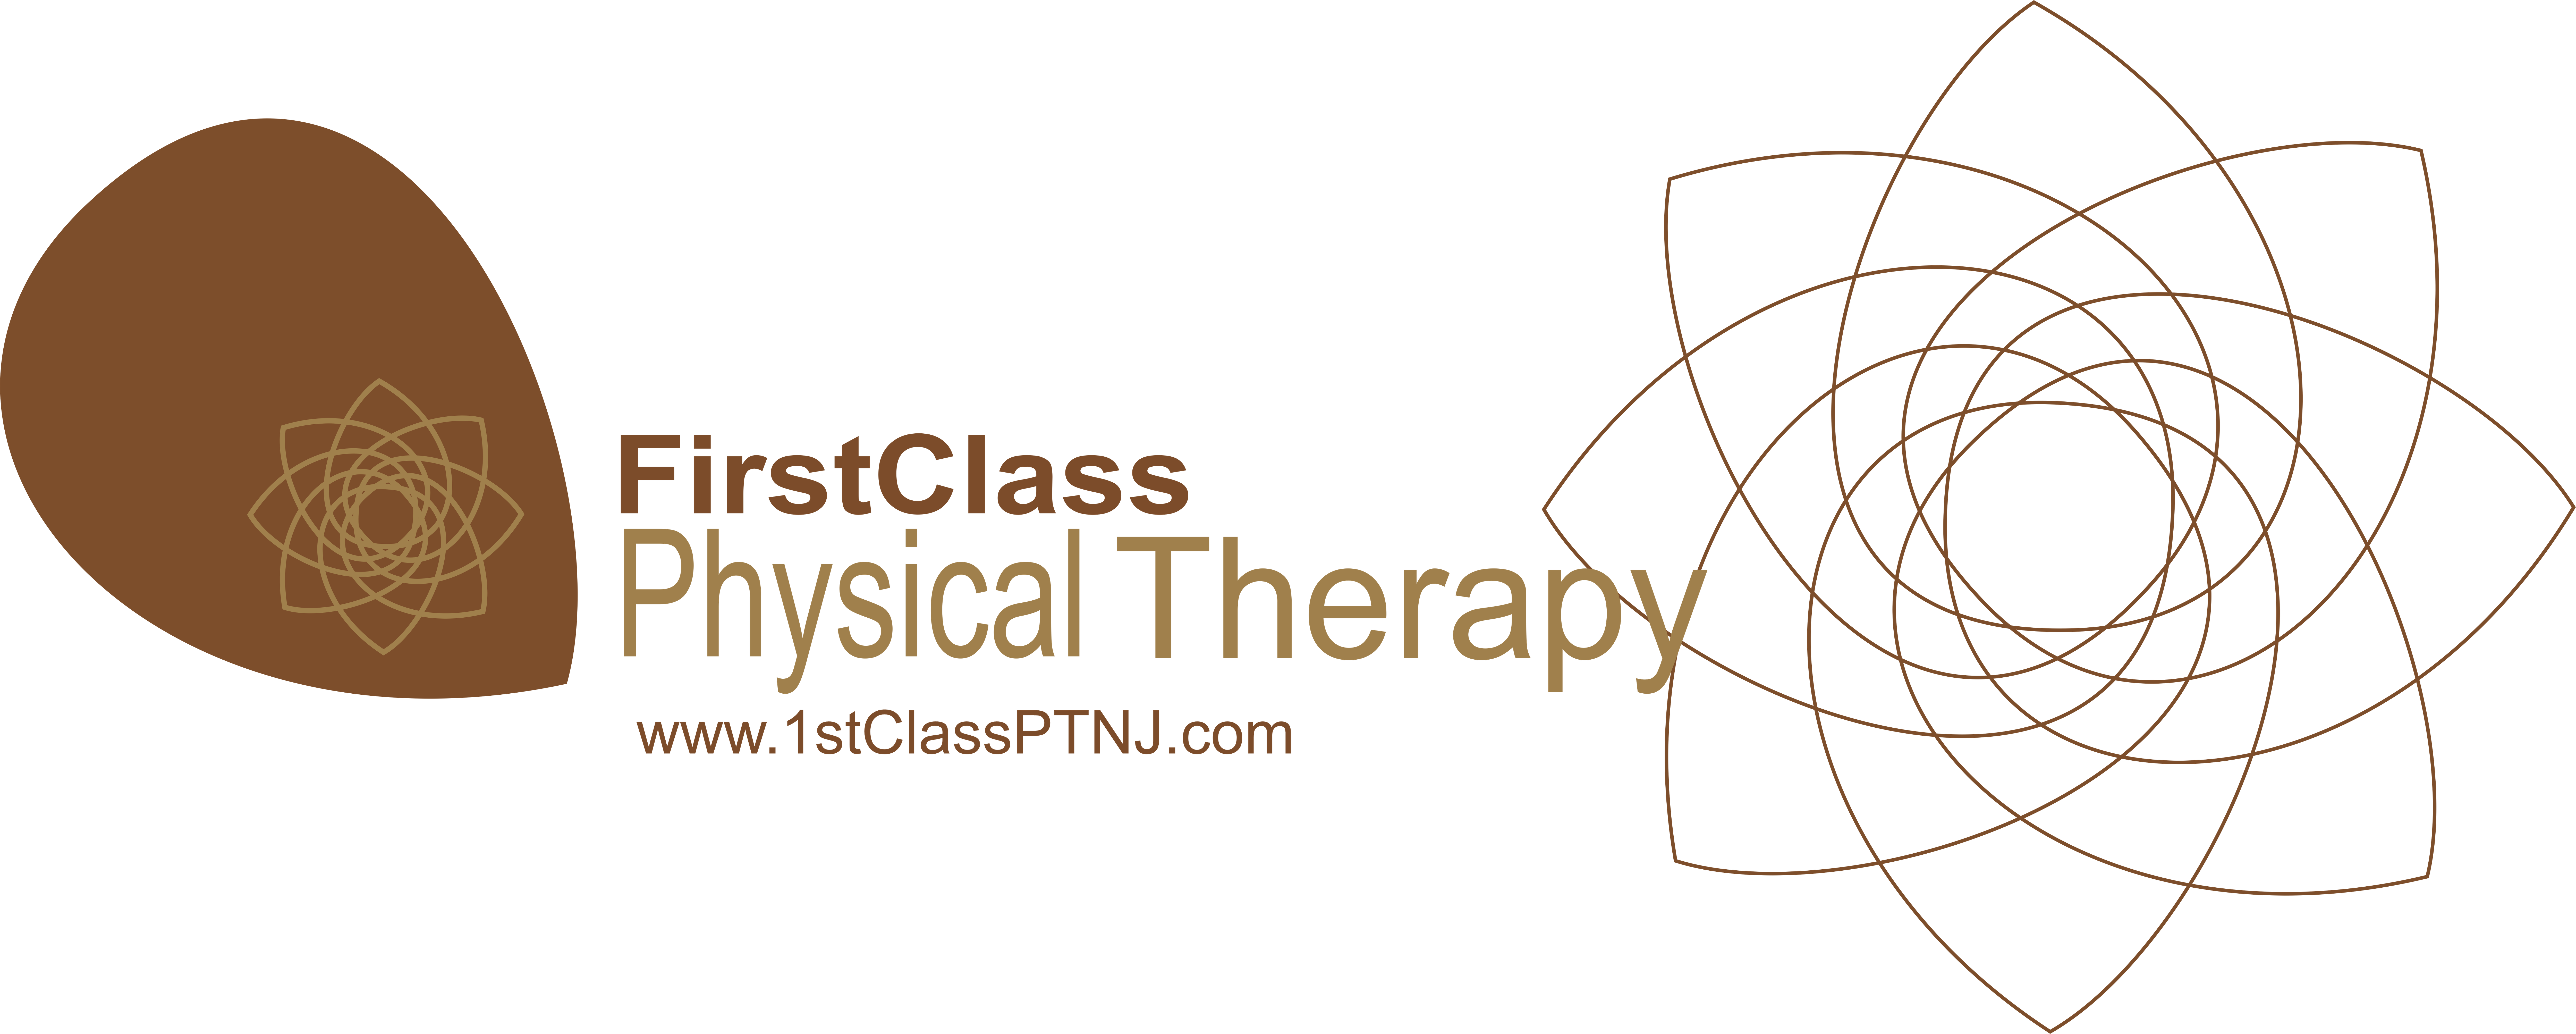 First Class Physical Therapy